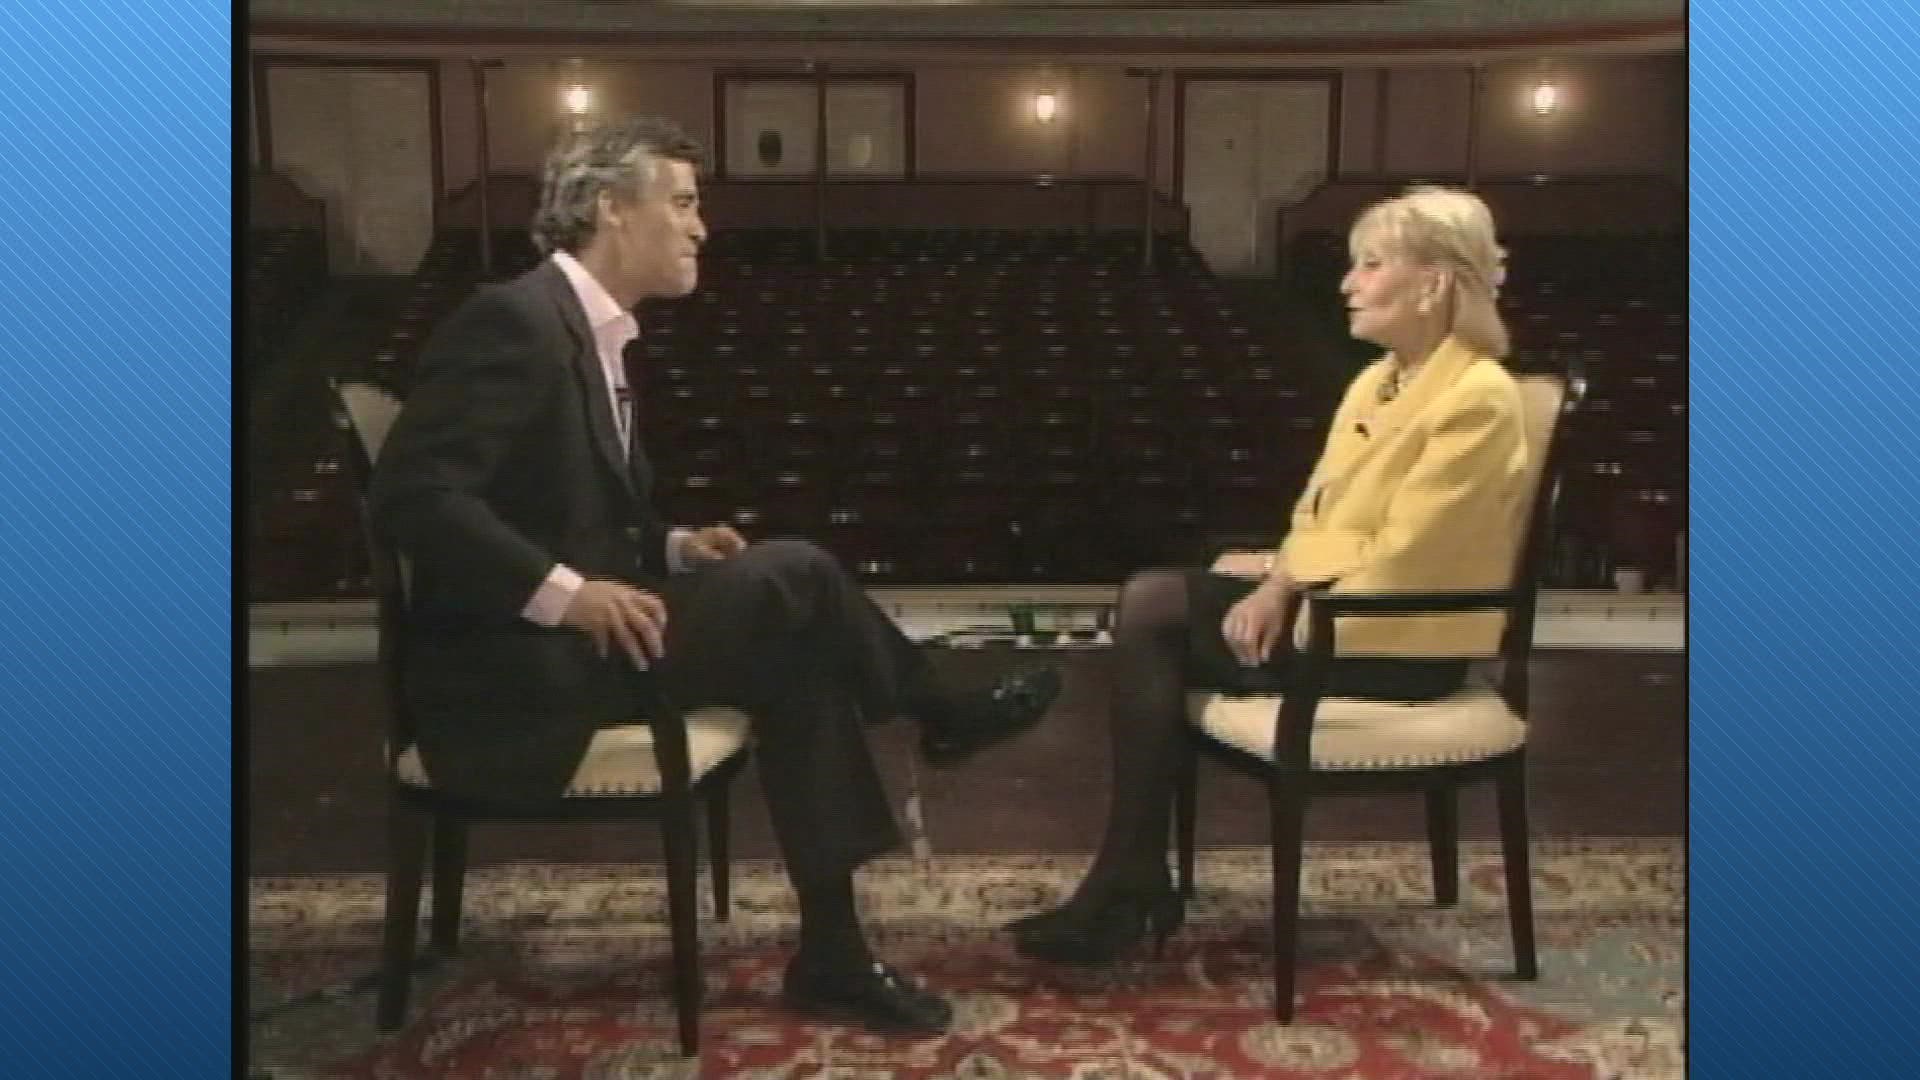 Rob Caldwell interviewed Walters while she was promoting her book, "Audition".